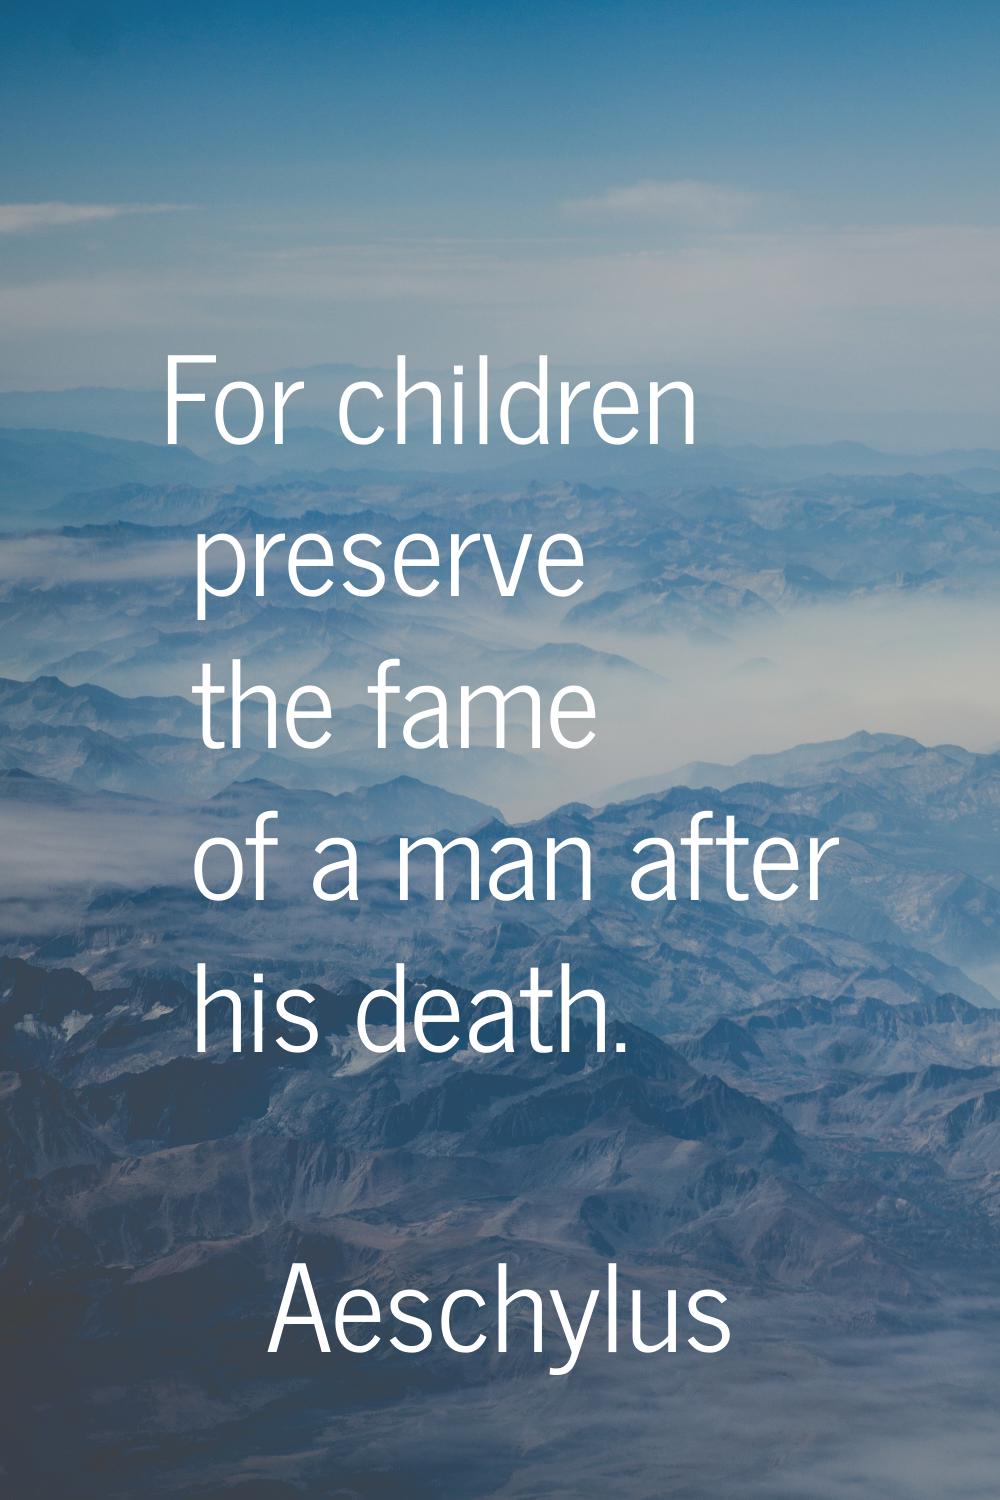 For children preserve the fame of a man after his death.